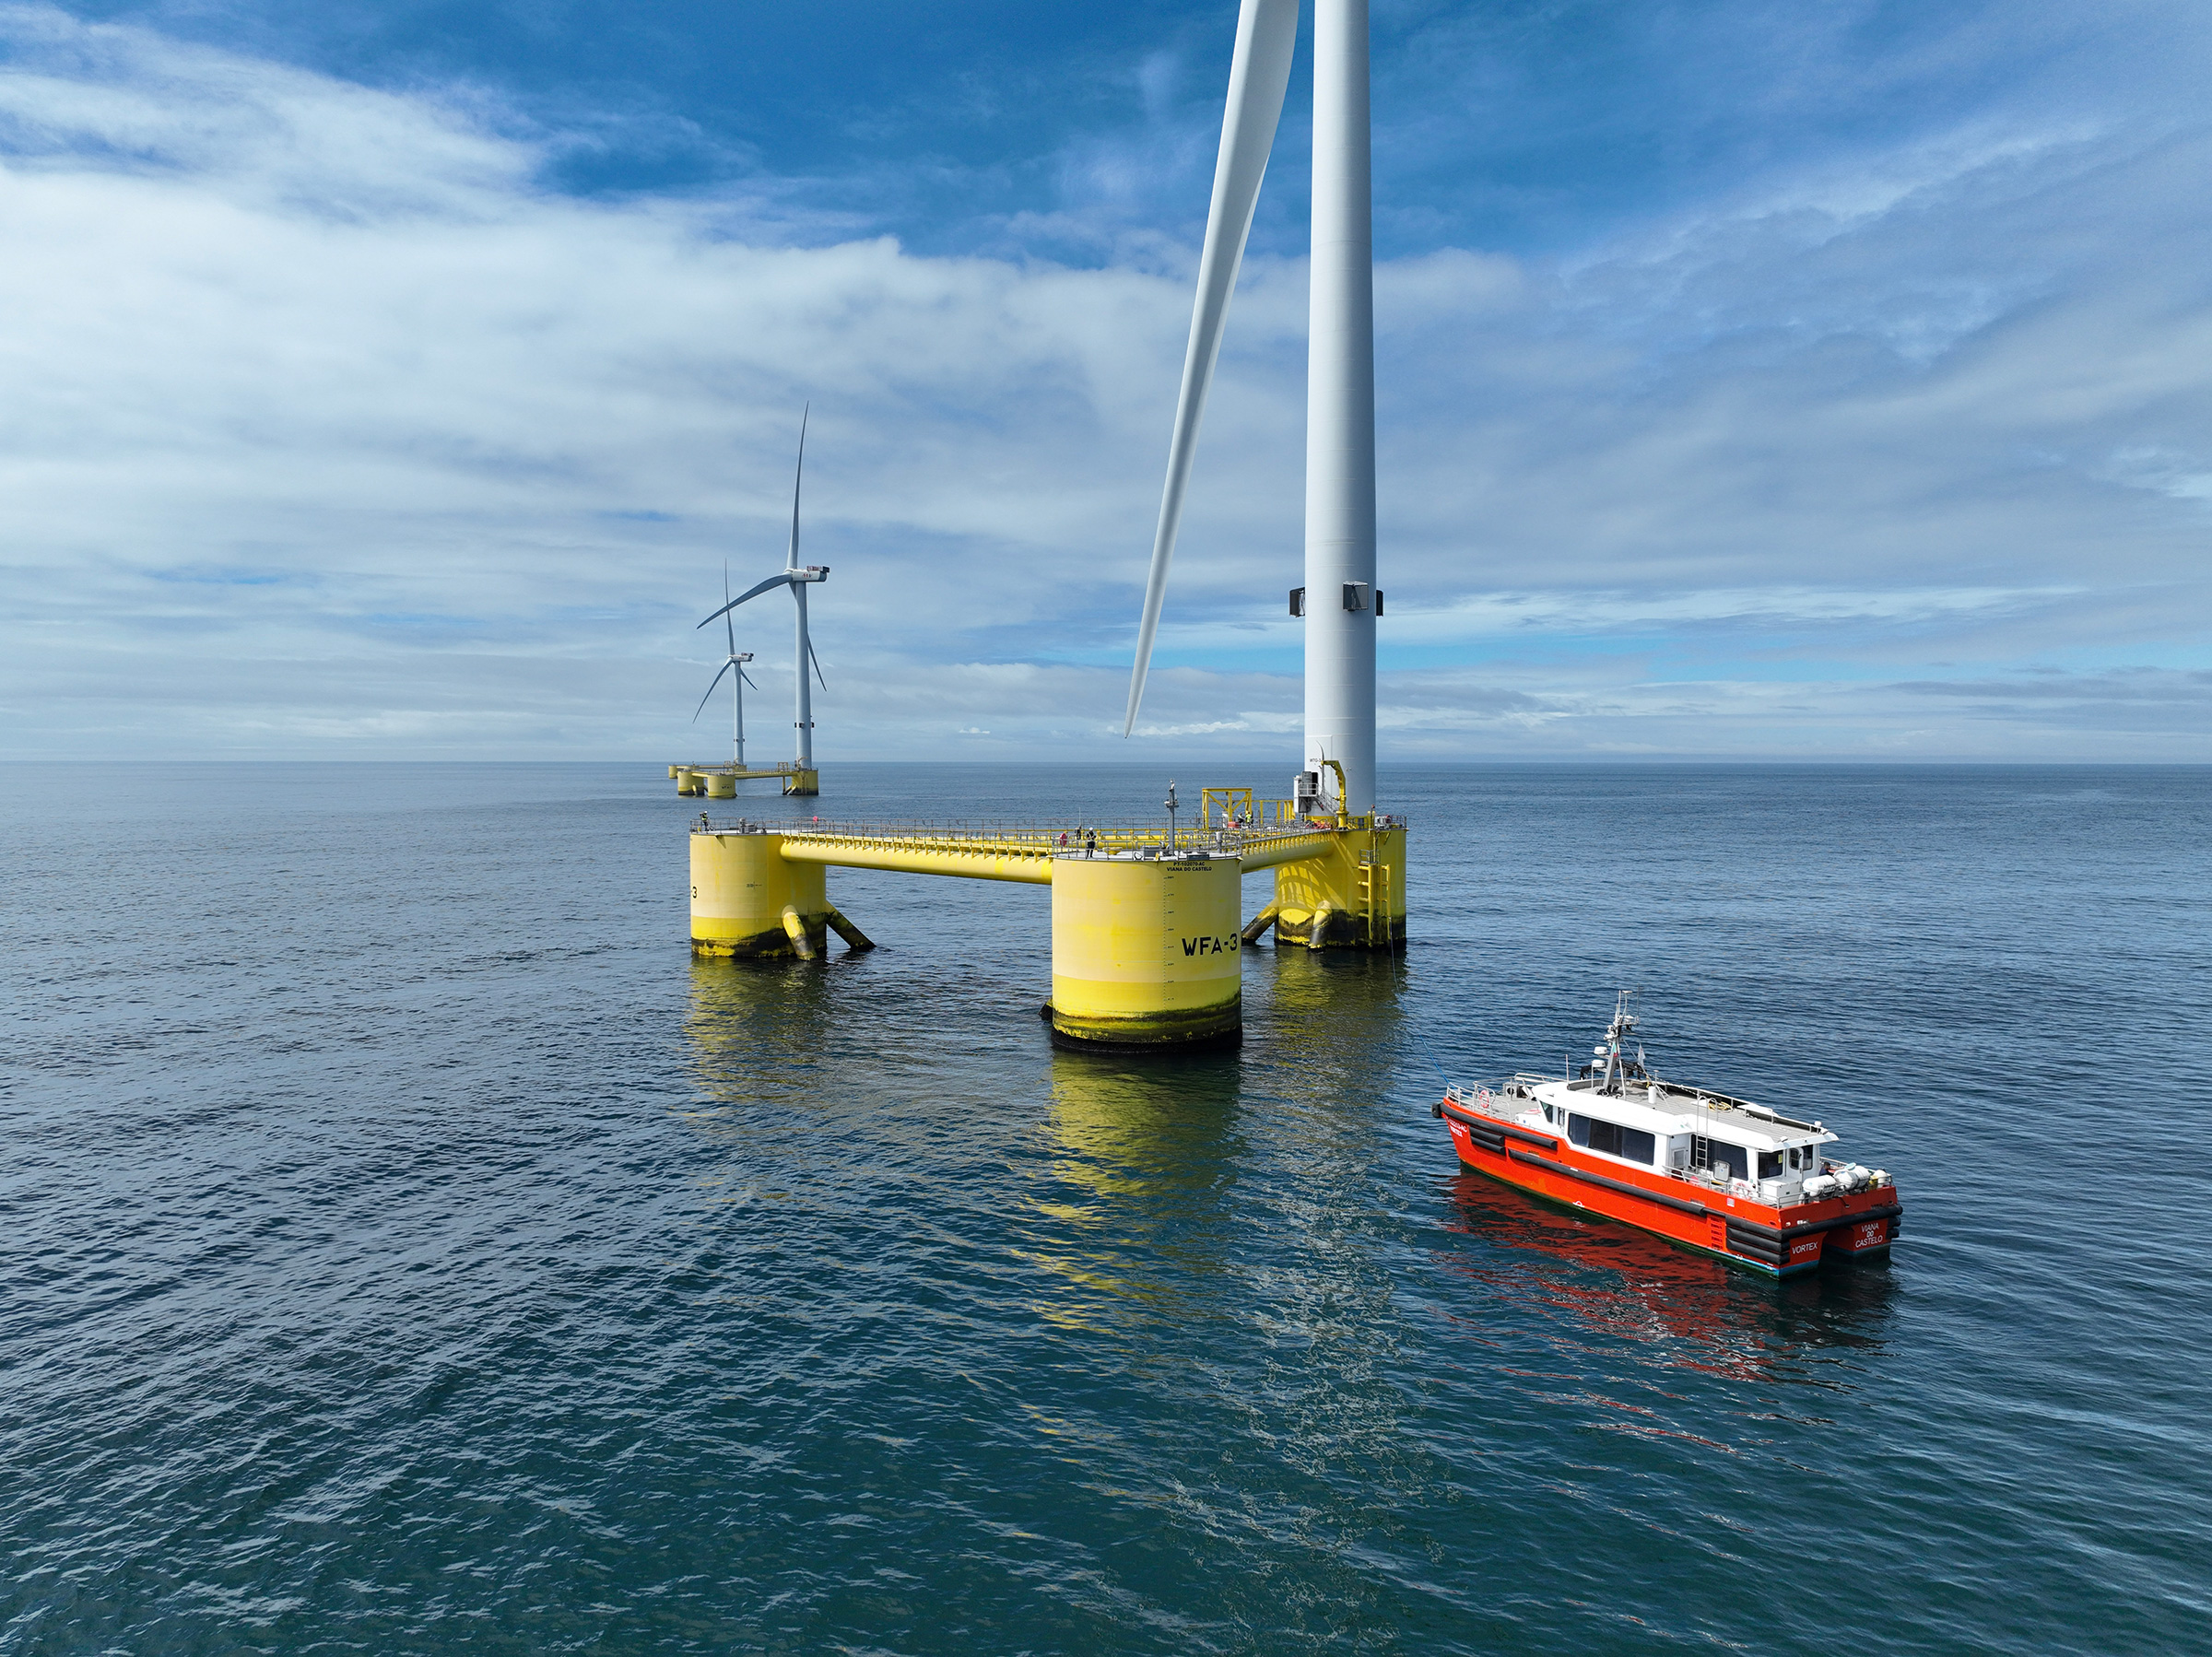 A CTV servicing the WindFloat Atlantic floating offshore wind farm. Photo of the WindFloat Atlantic project courtesy of Principle Power/Ocean Winds.